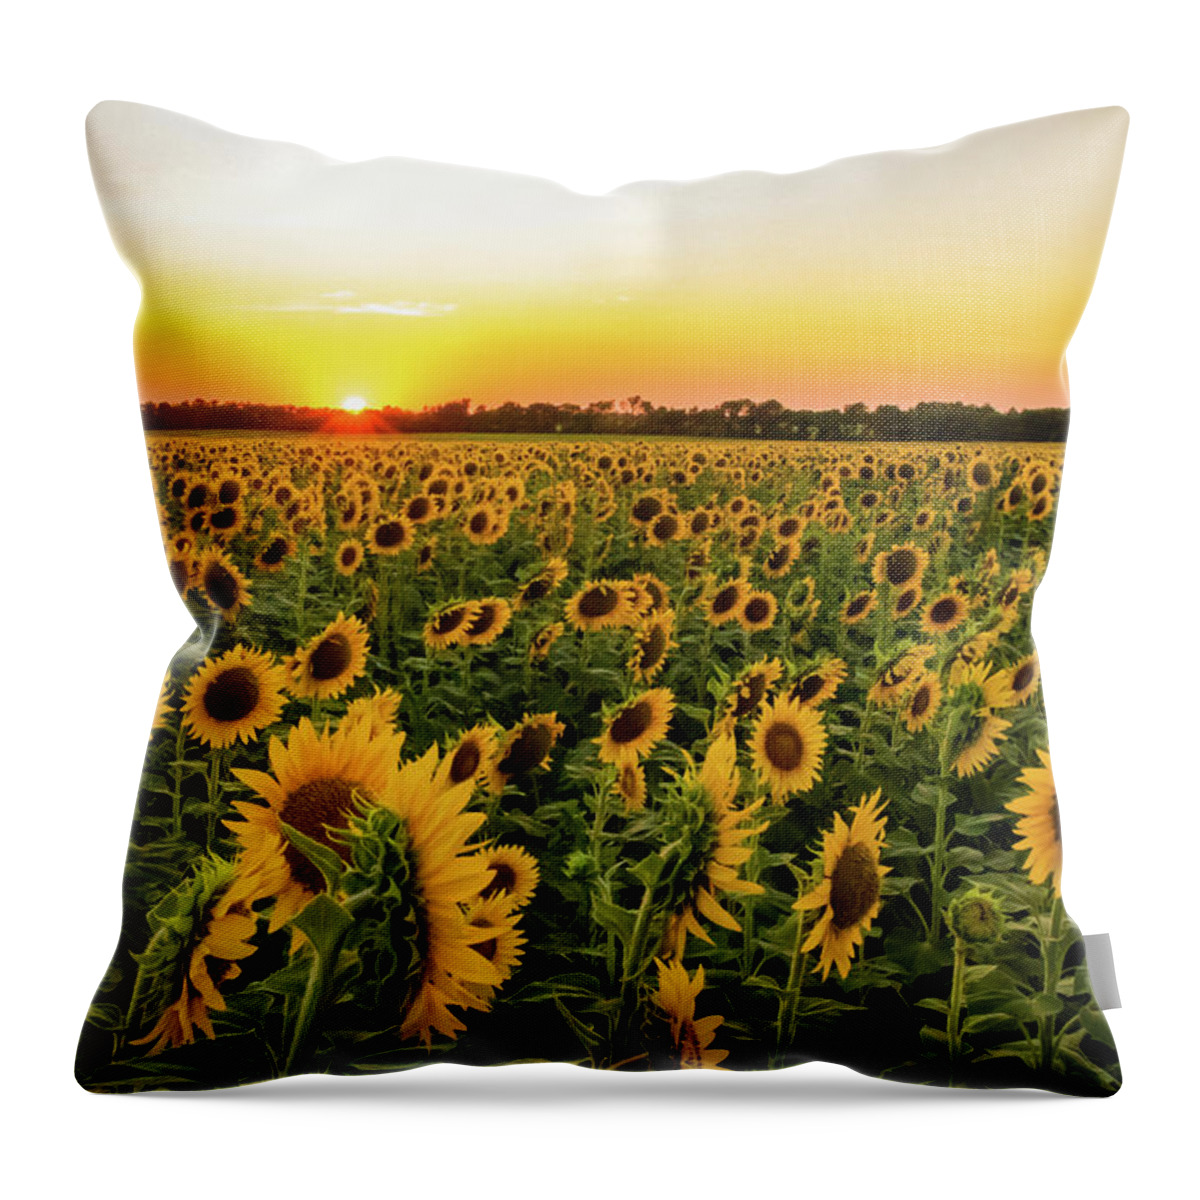 Jay Stockhaus Throw Pillow featuring the photograph Sunflowers at Sunset by Jay Stockhaus